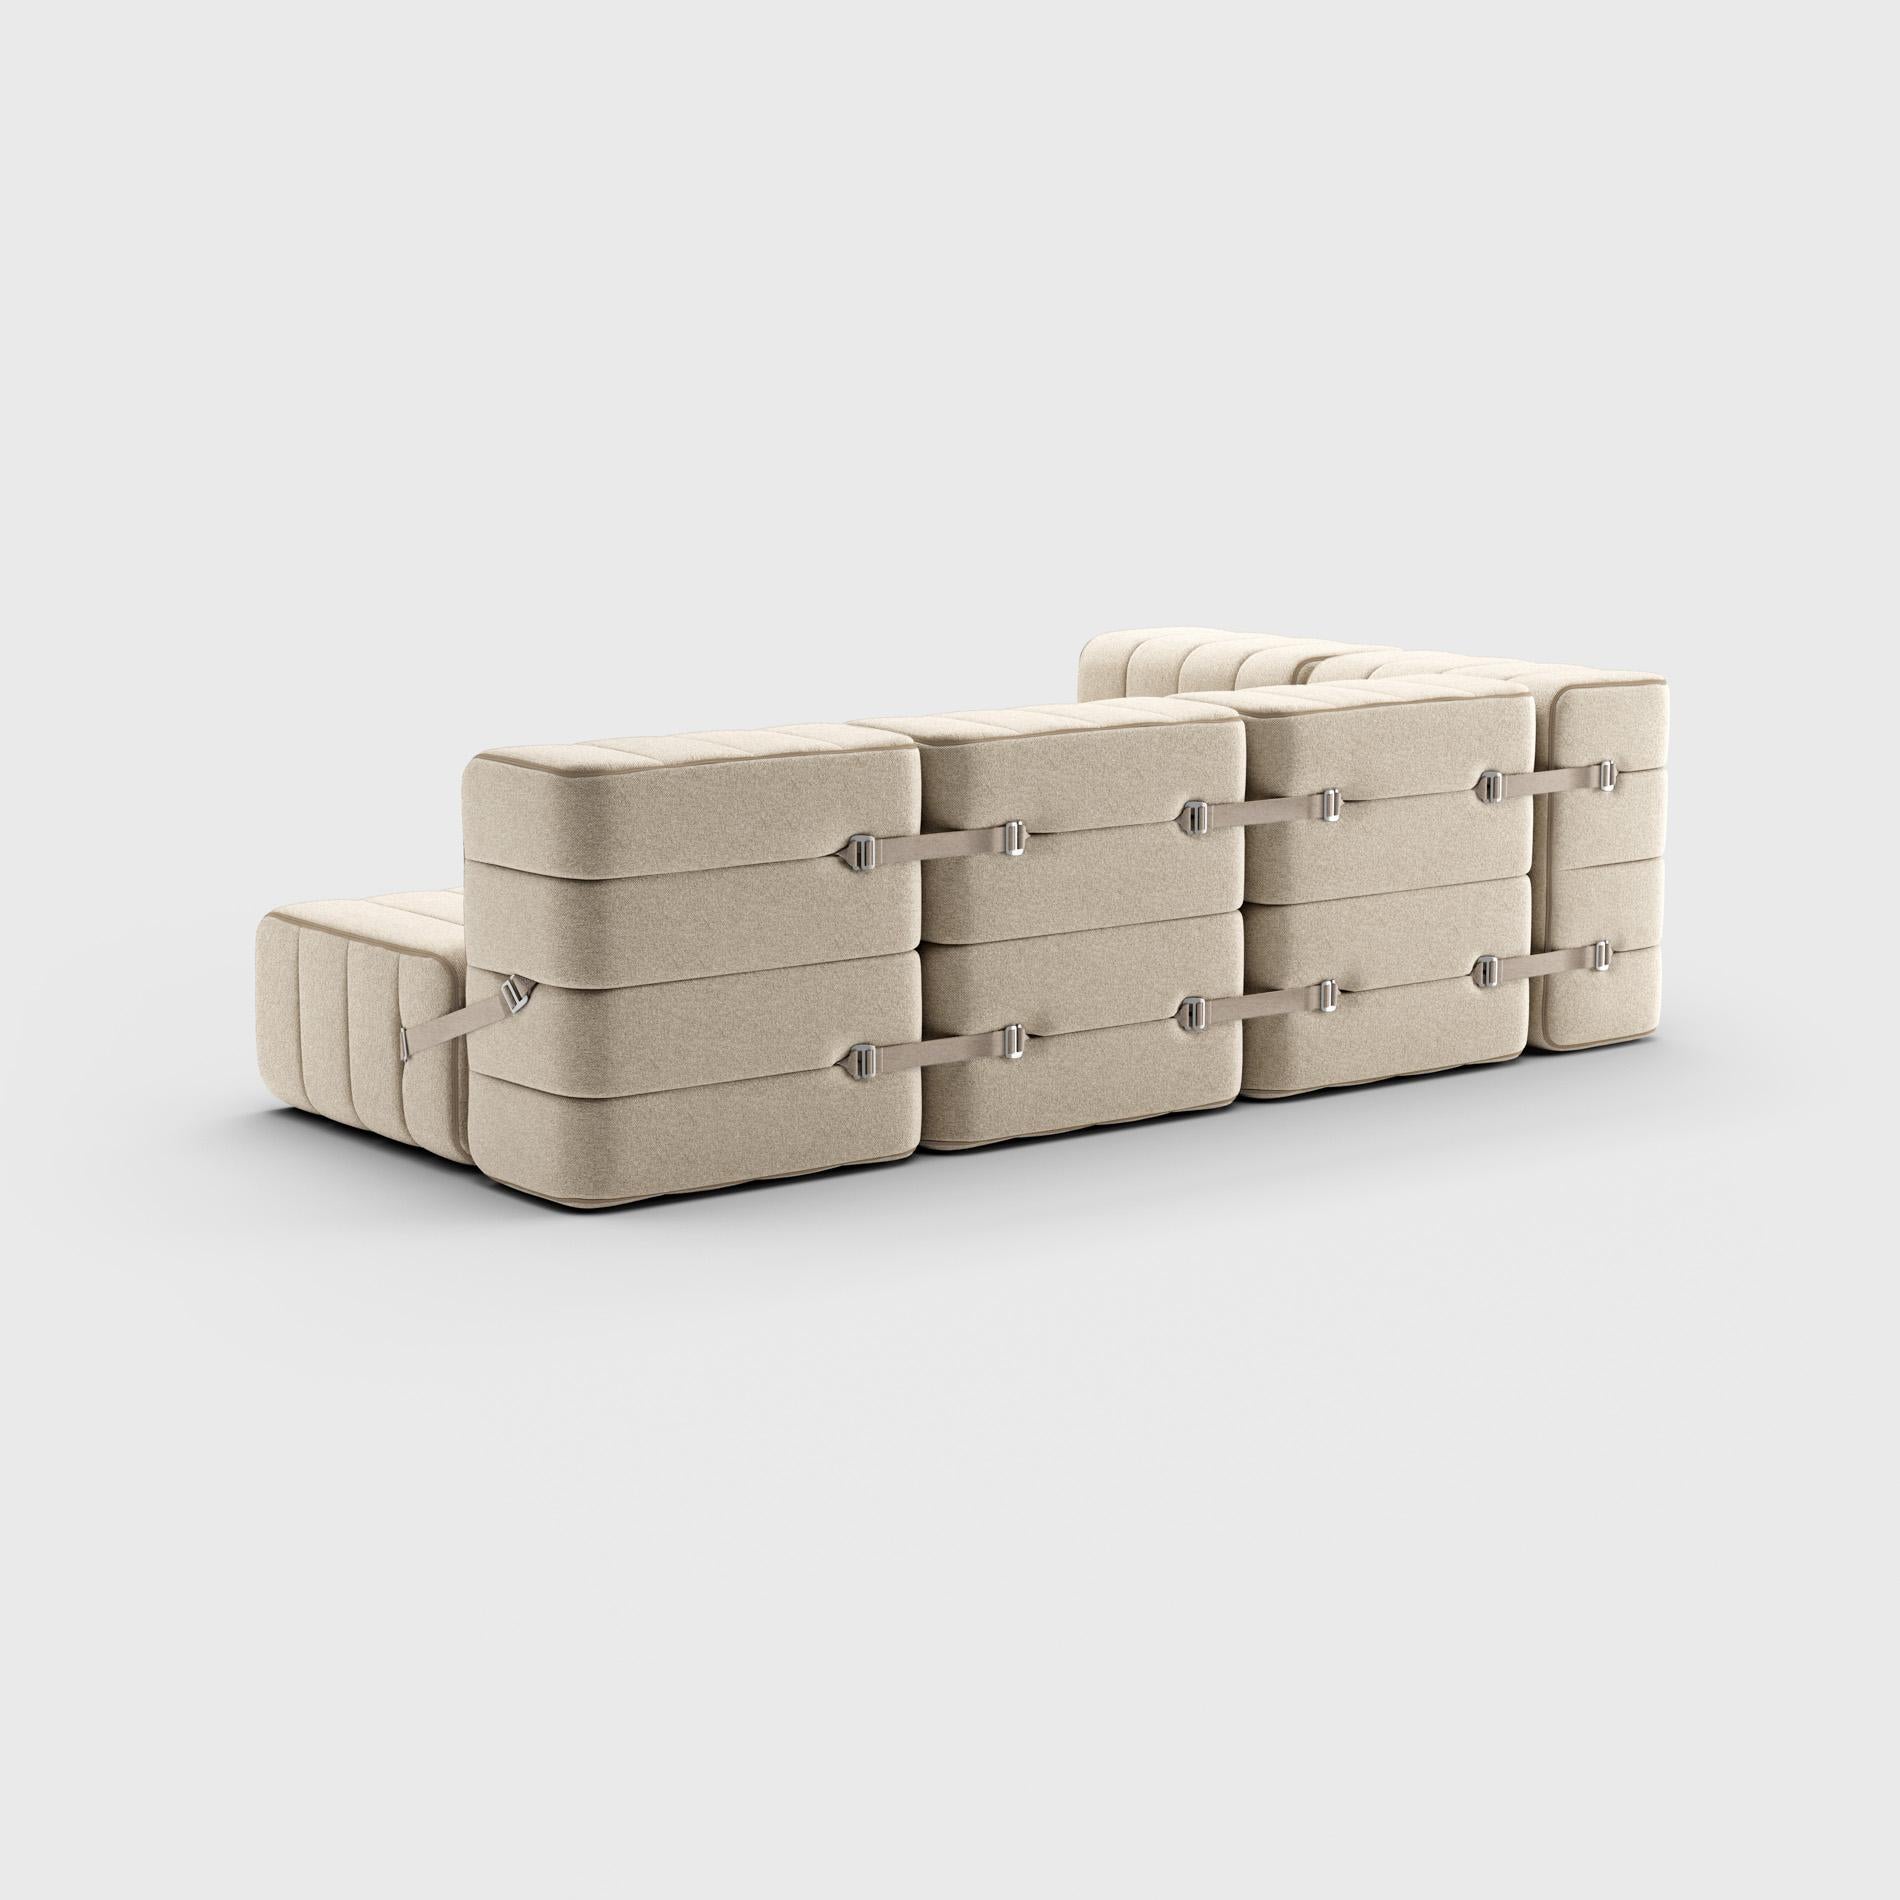 Curt Single Module – Fabric Jet '9110 Grey / Beige' – Curt Modular Sofa System In New Condition For Sale In Berlin, BE